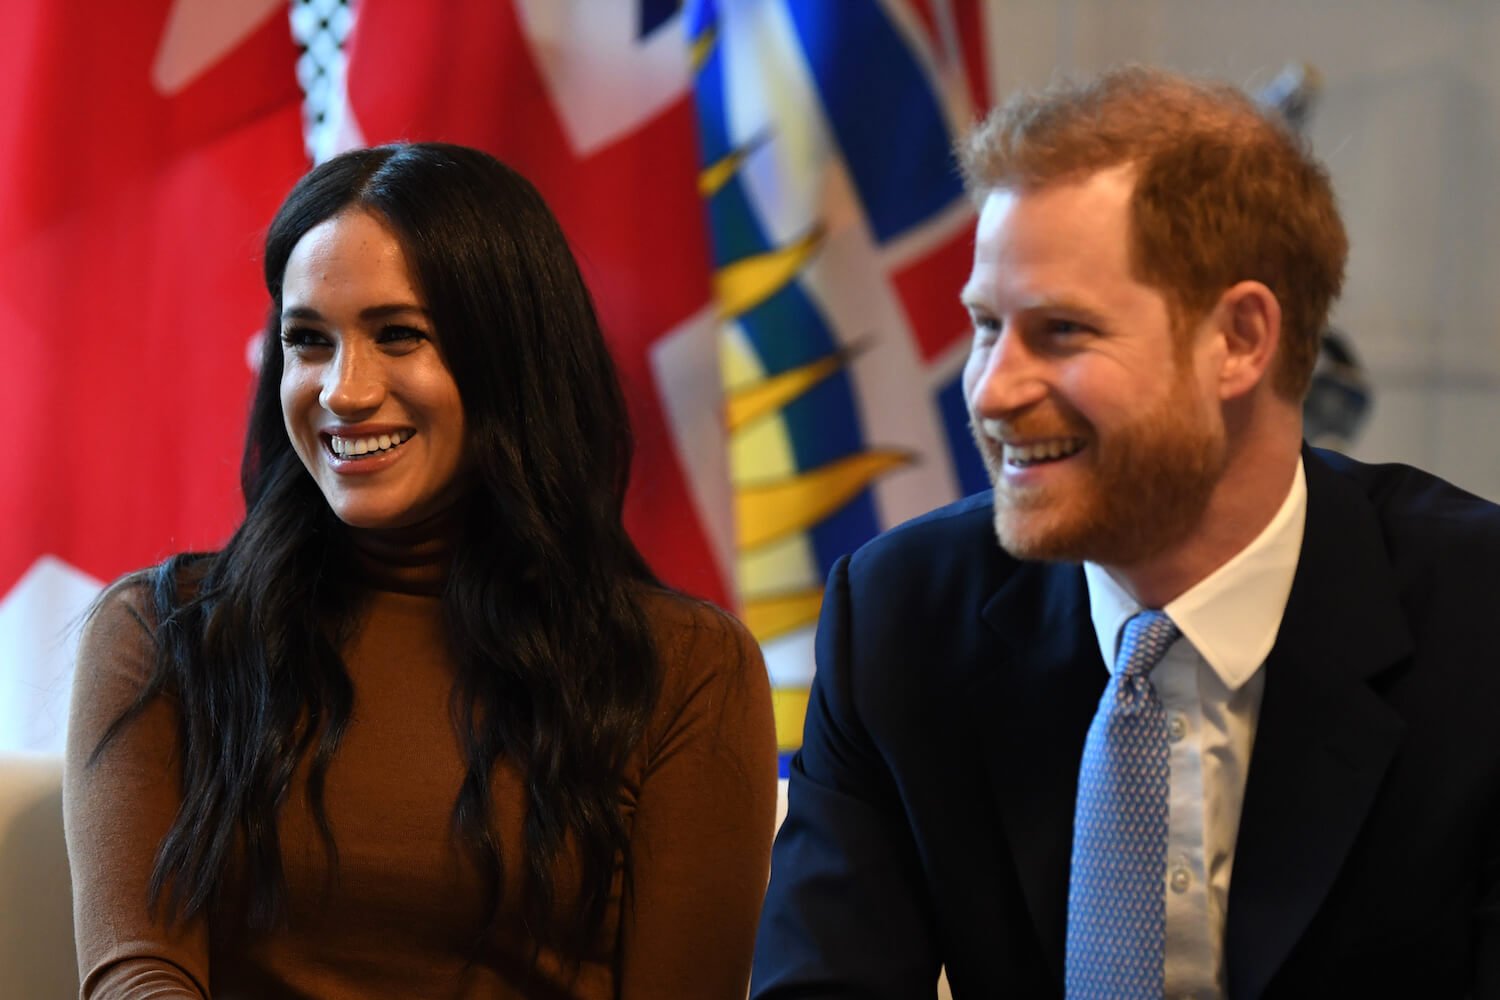 Meghan Markle wears a brown turtleneck and smiles while sitting next to Prince Harry, wearing a suit and tie and smiling